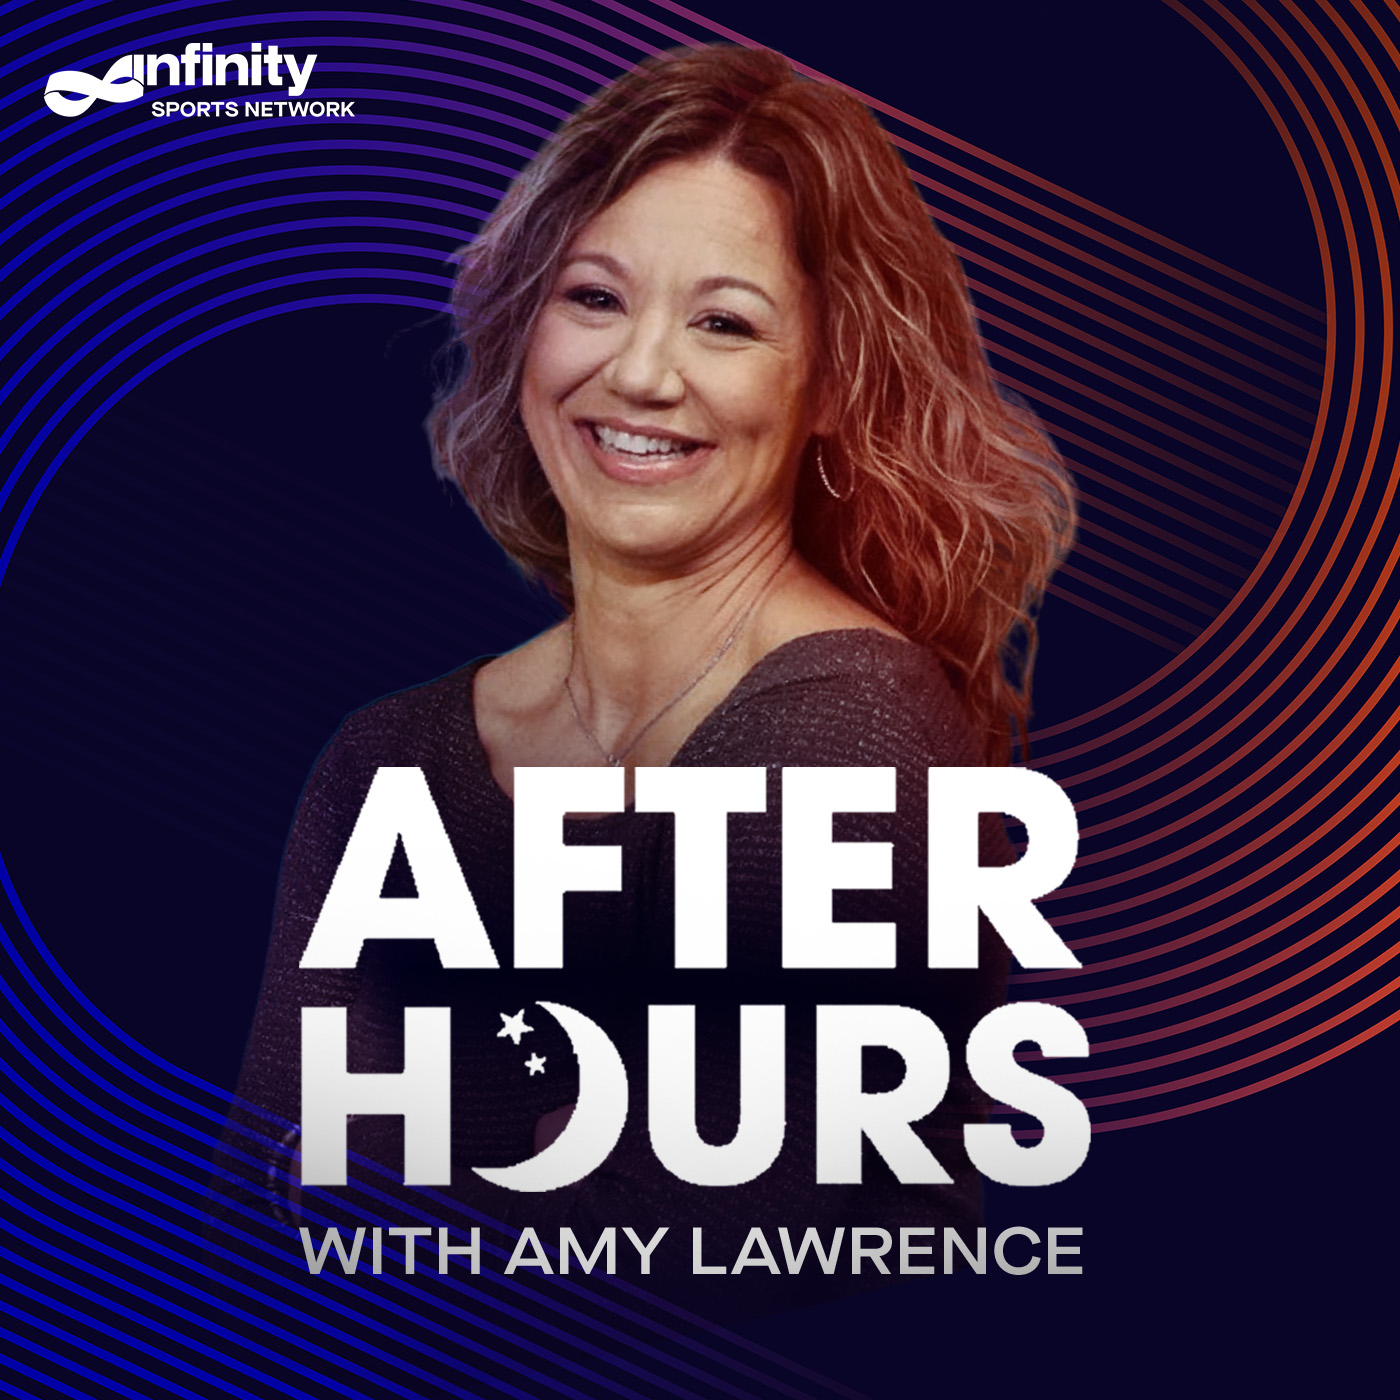 2-9-22 After Hours with Amy Lawrence PODCAST: Hour 3